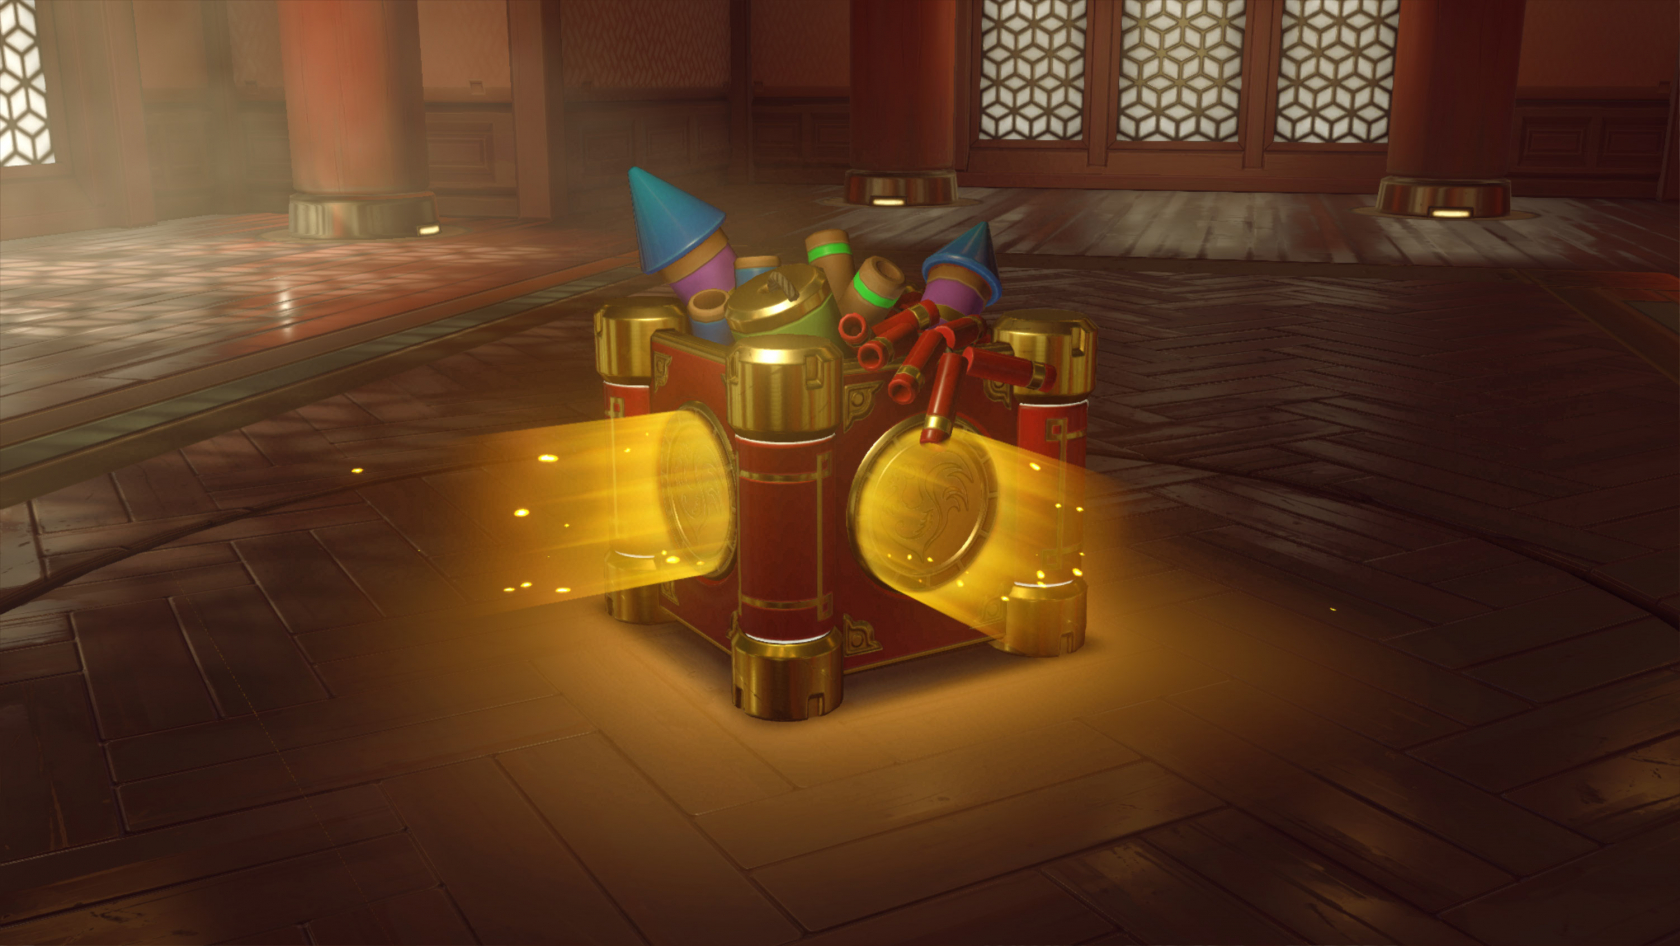 ESRB rules that loot boxes do not qualify as gambling